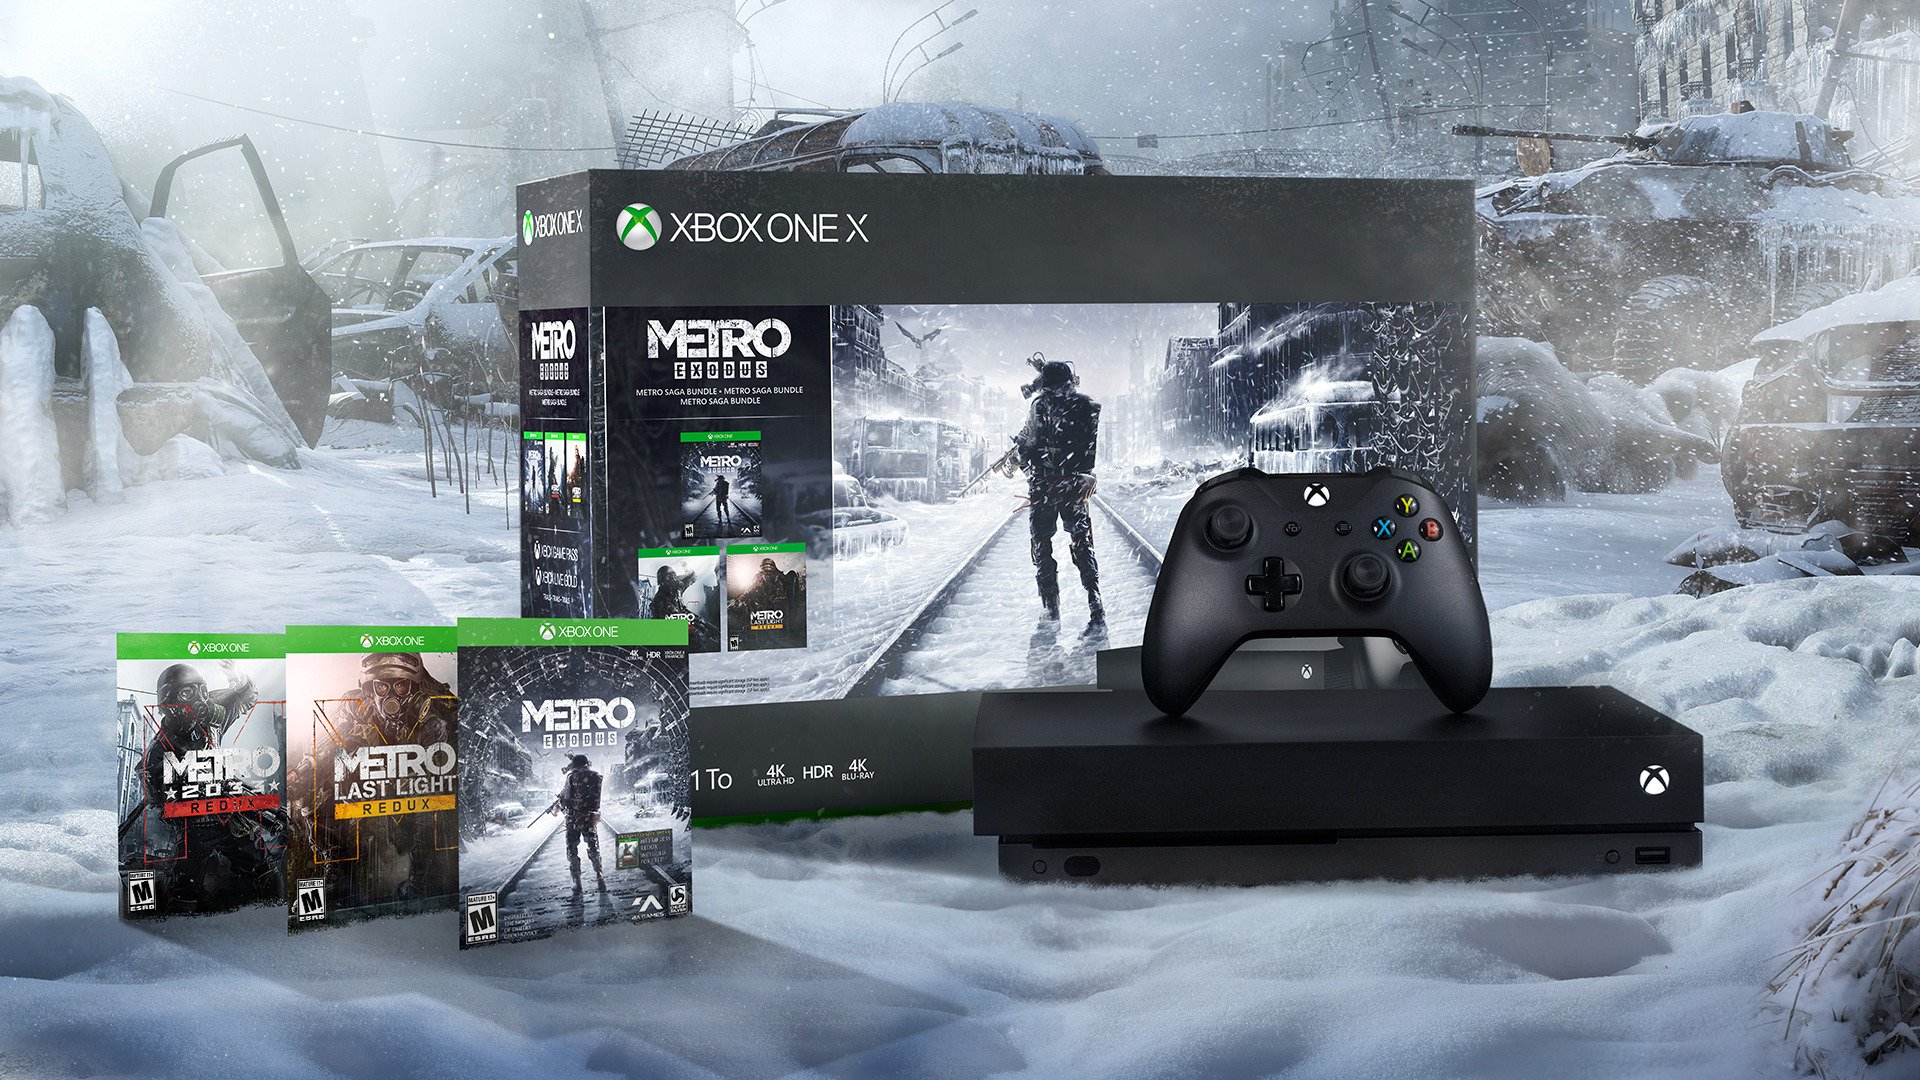 Xbox on Twitter: "Grab the #Xbox One X Metro Saga Bundle and play the whole  story, including #MetroExodus. For a limited time save $50 on all Xbox One  bundles: https://t.co/FUFB5uLy48 https://t.co/W87PbhvykM" /